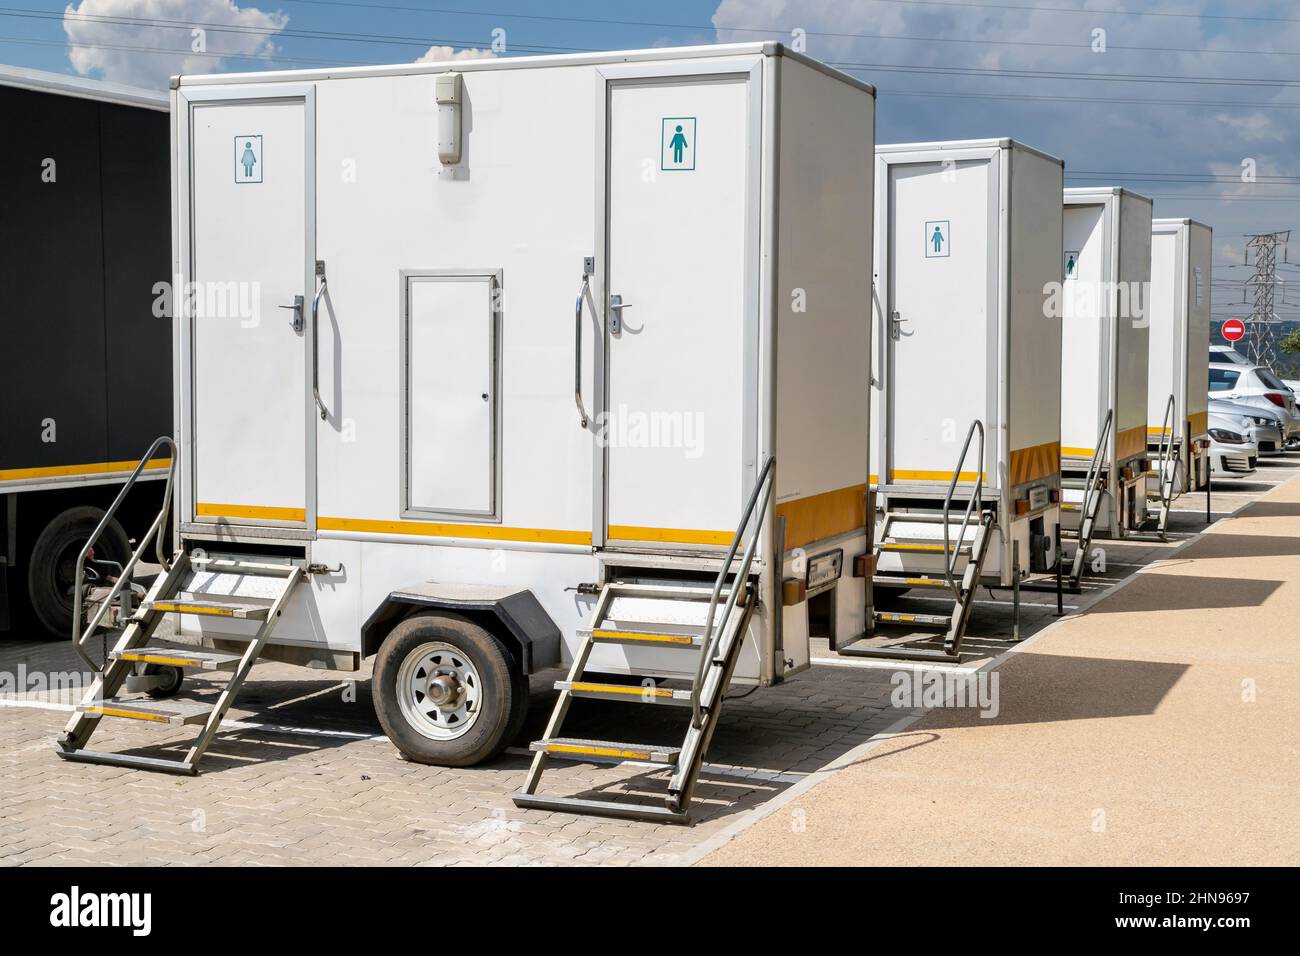 Johannesburg, South Africa, 9th February - 2021: Portable toilets for large events or gatherings. Stock Photo